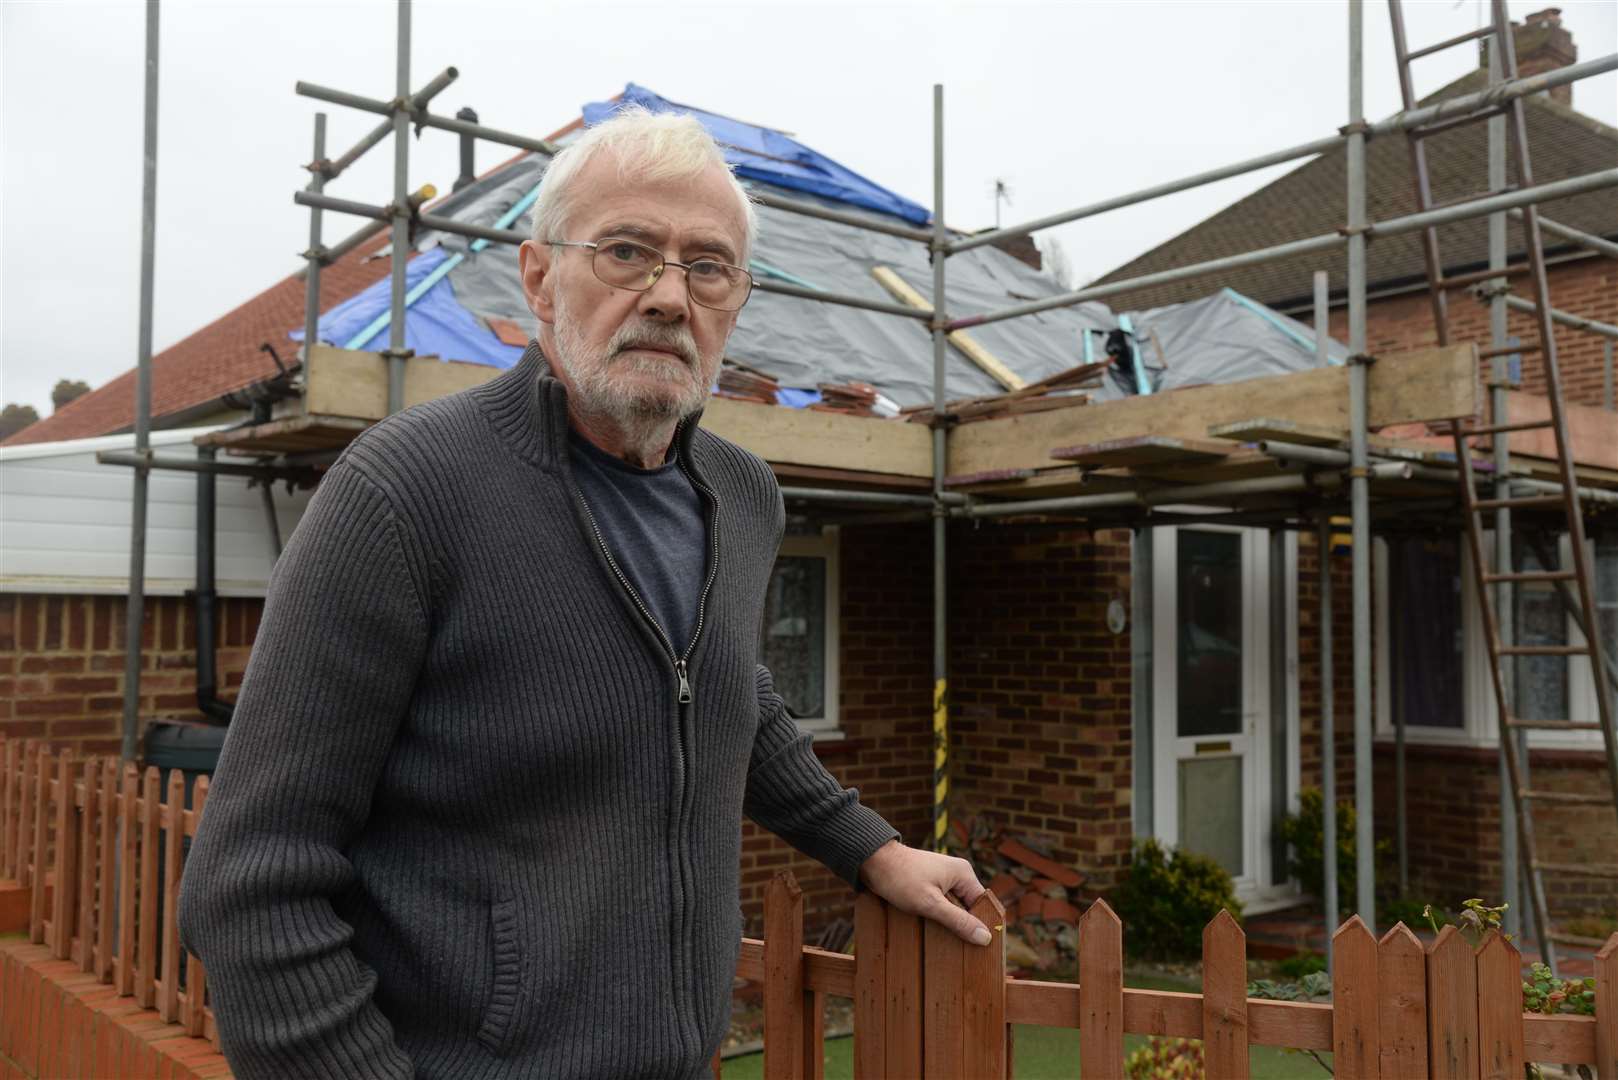 Malcolm Bishop was tricked out of £73,000 to repair his roof